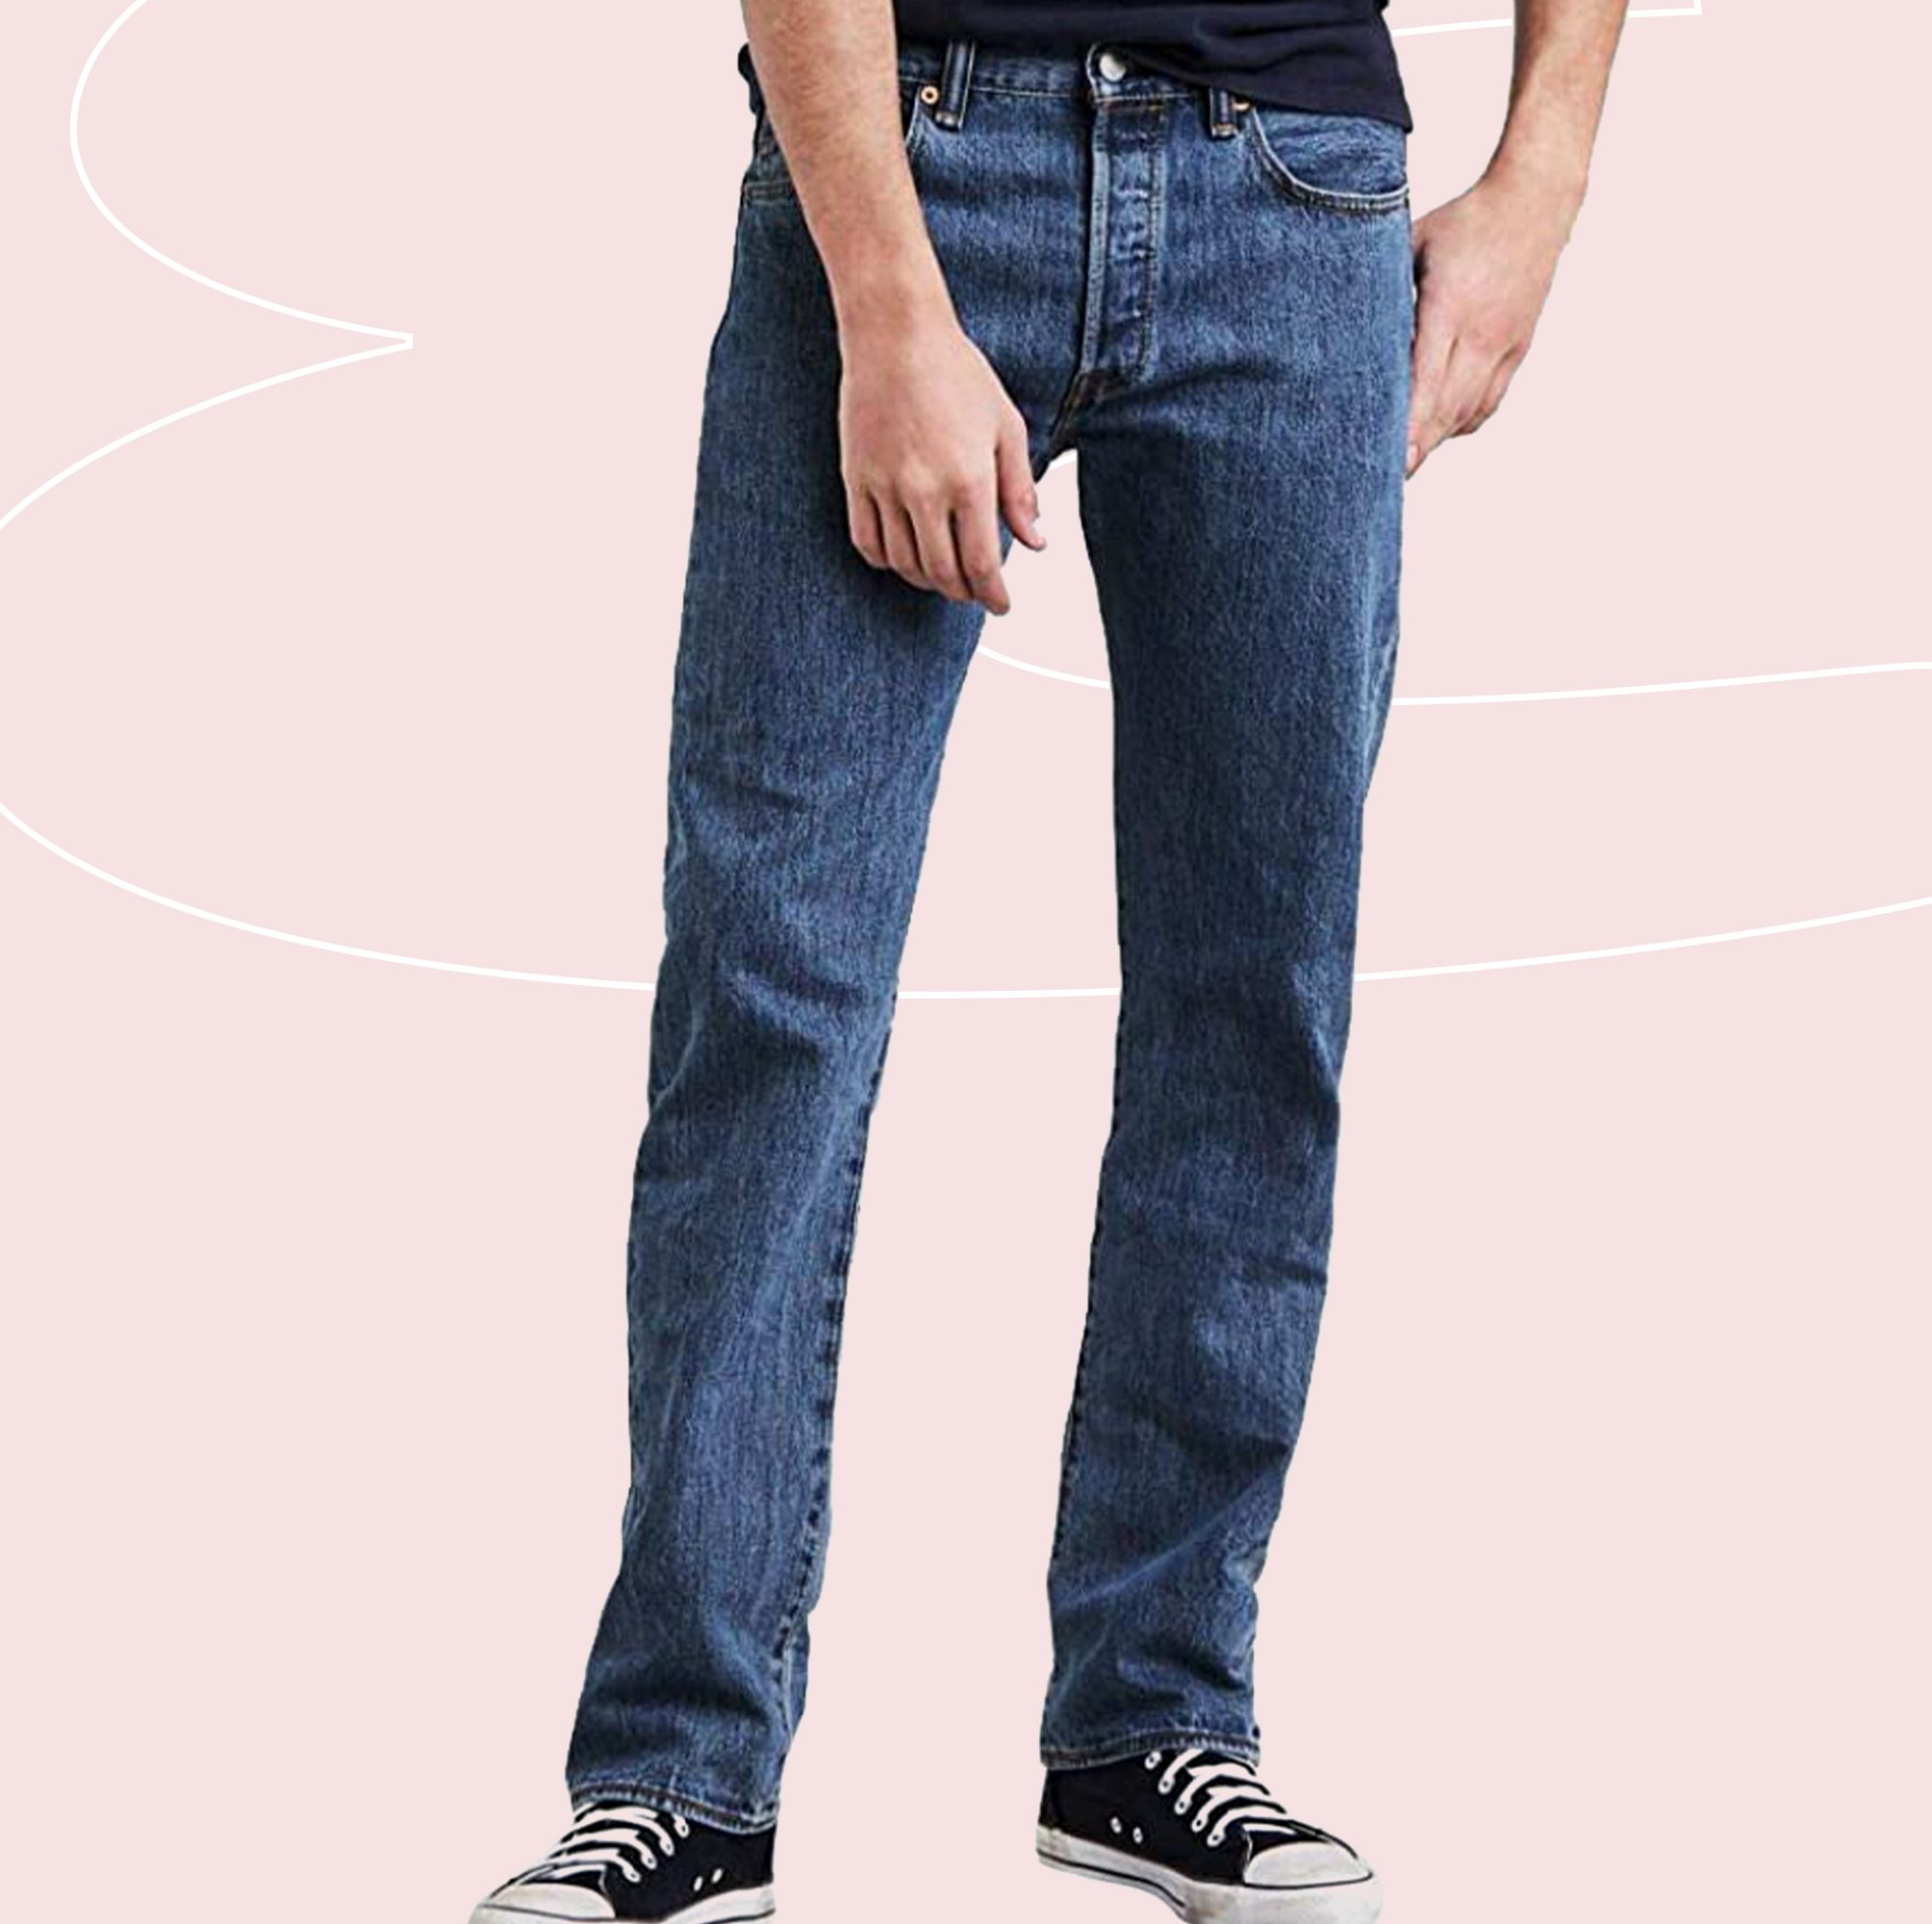 The Best Levi's Jeans Are Up to 60% Off for Amazon Prime Day